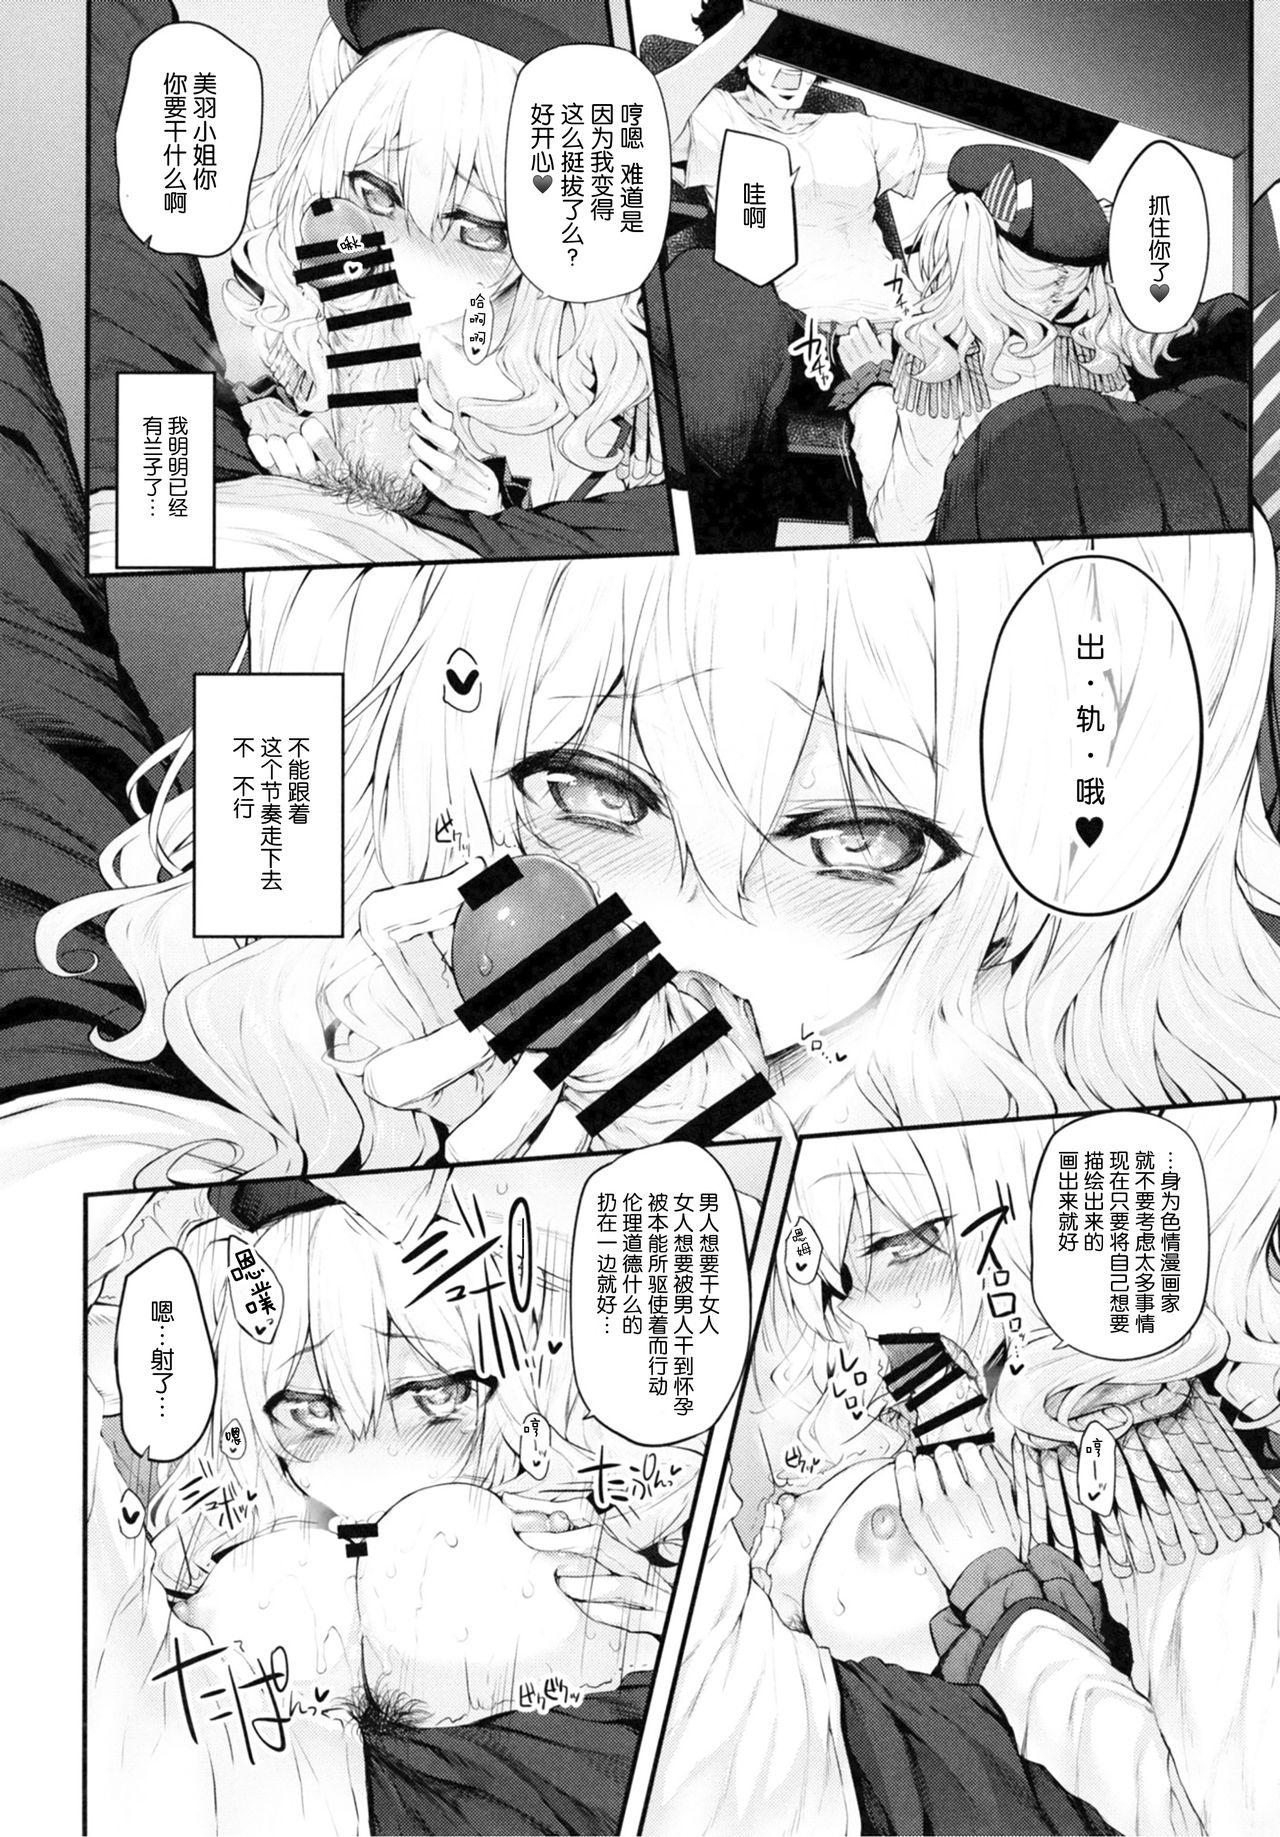 Bald Pussy COSBITCH! Marked-girls Origin Vol. 1 - Kantai collection Animated - Page 12